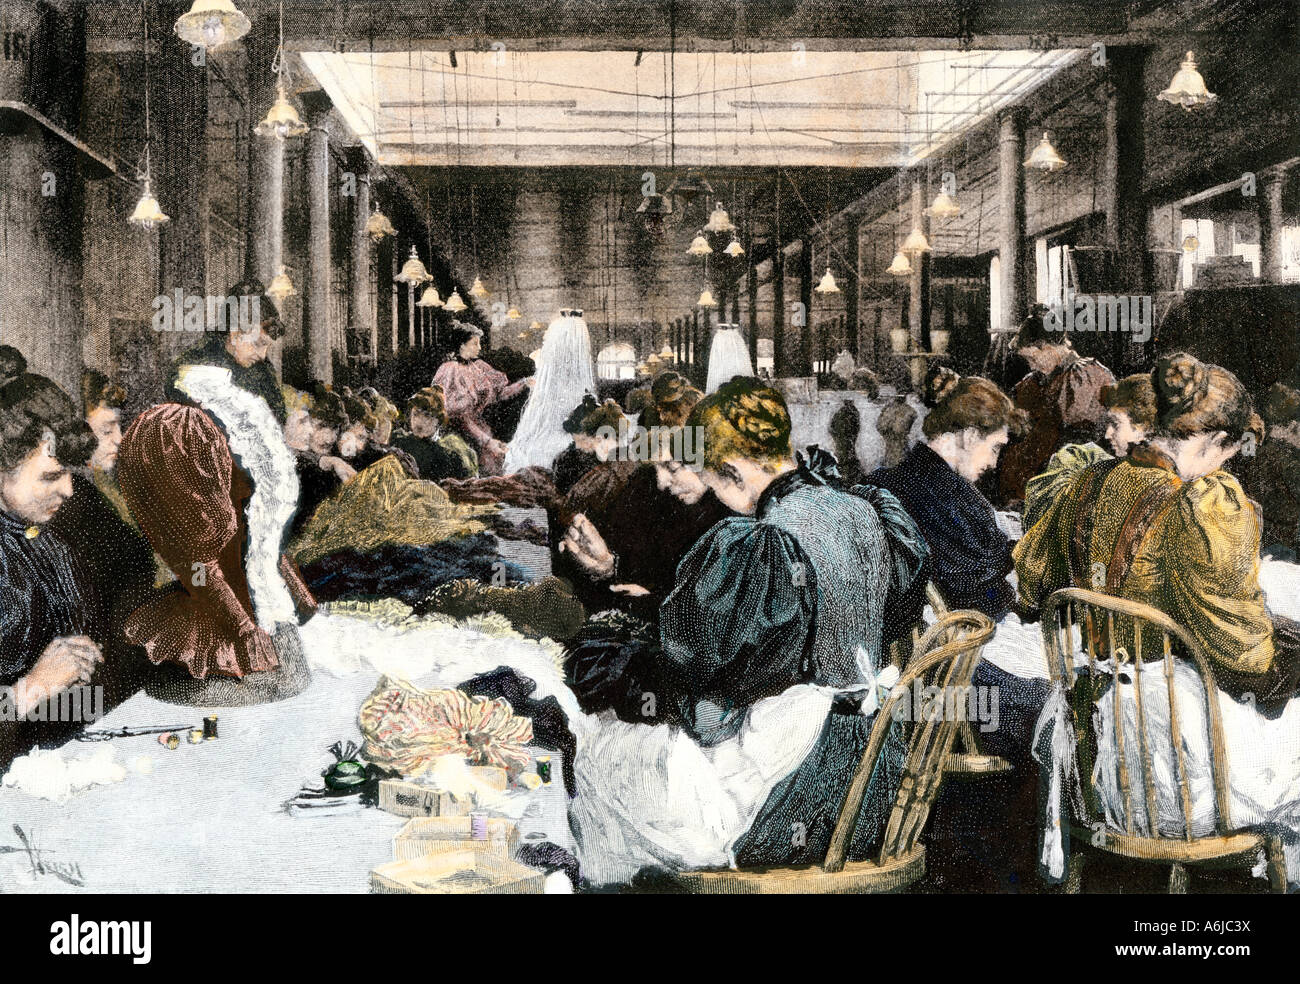 Women garment workers in the dressmaking department of a factory about 1890. Hand-colored halftone of an illustration Stock Photo